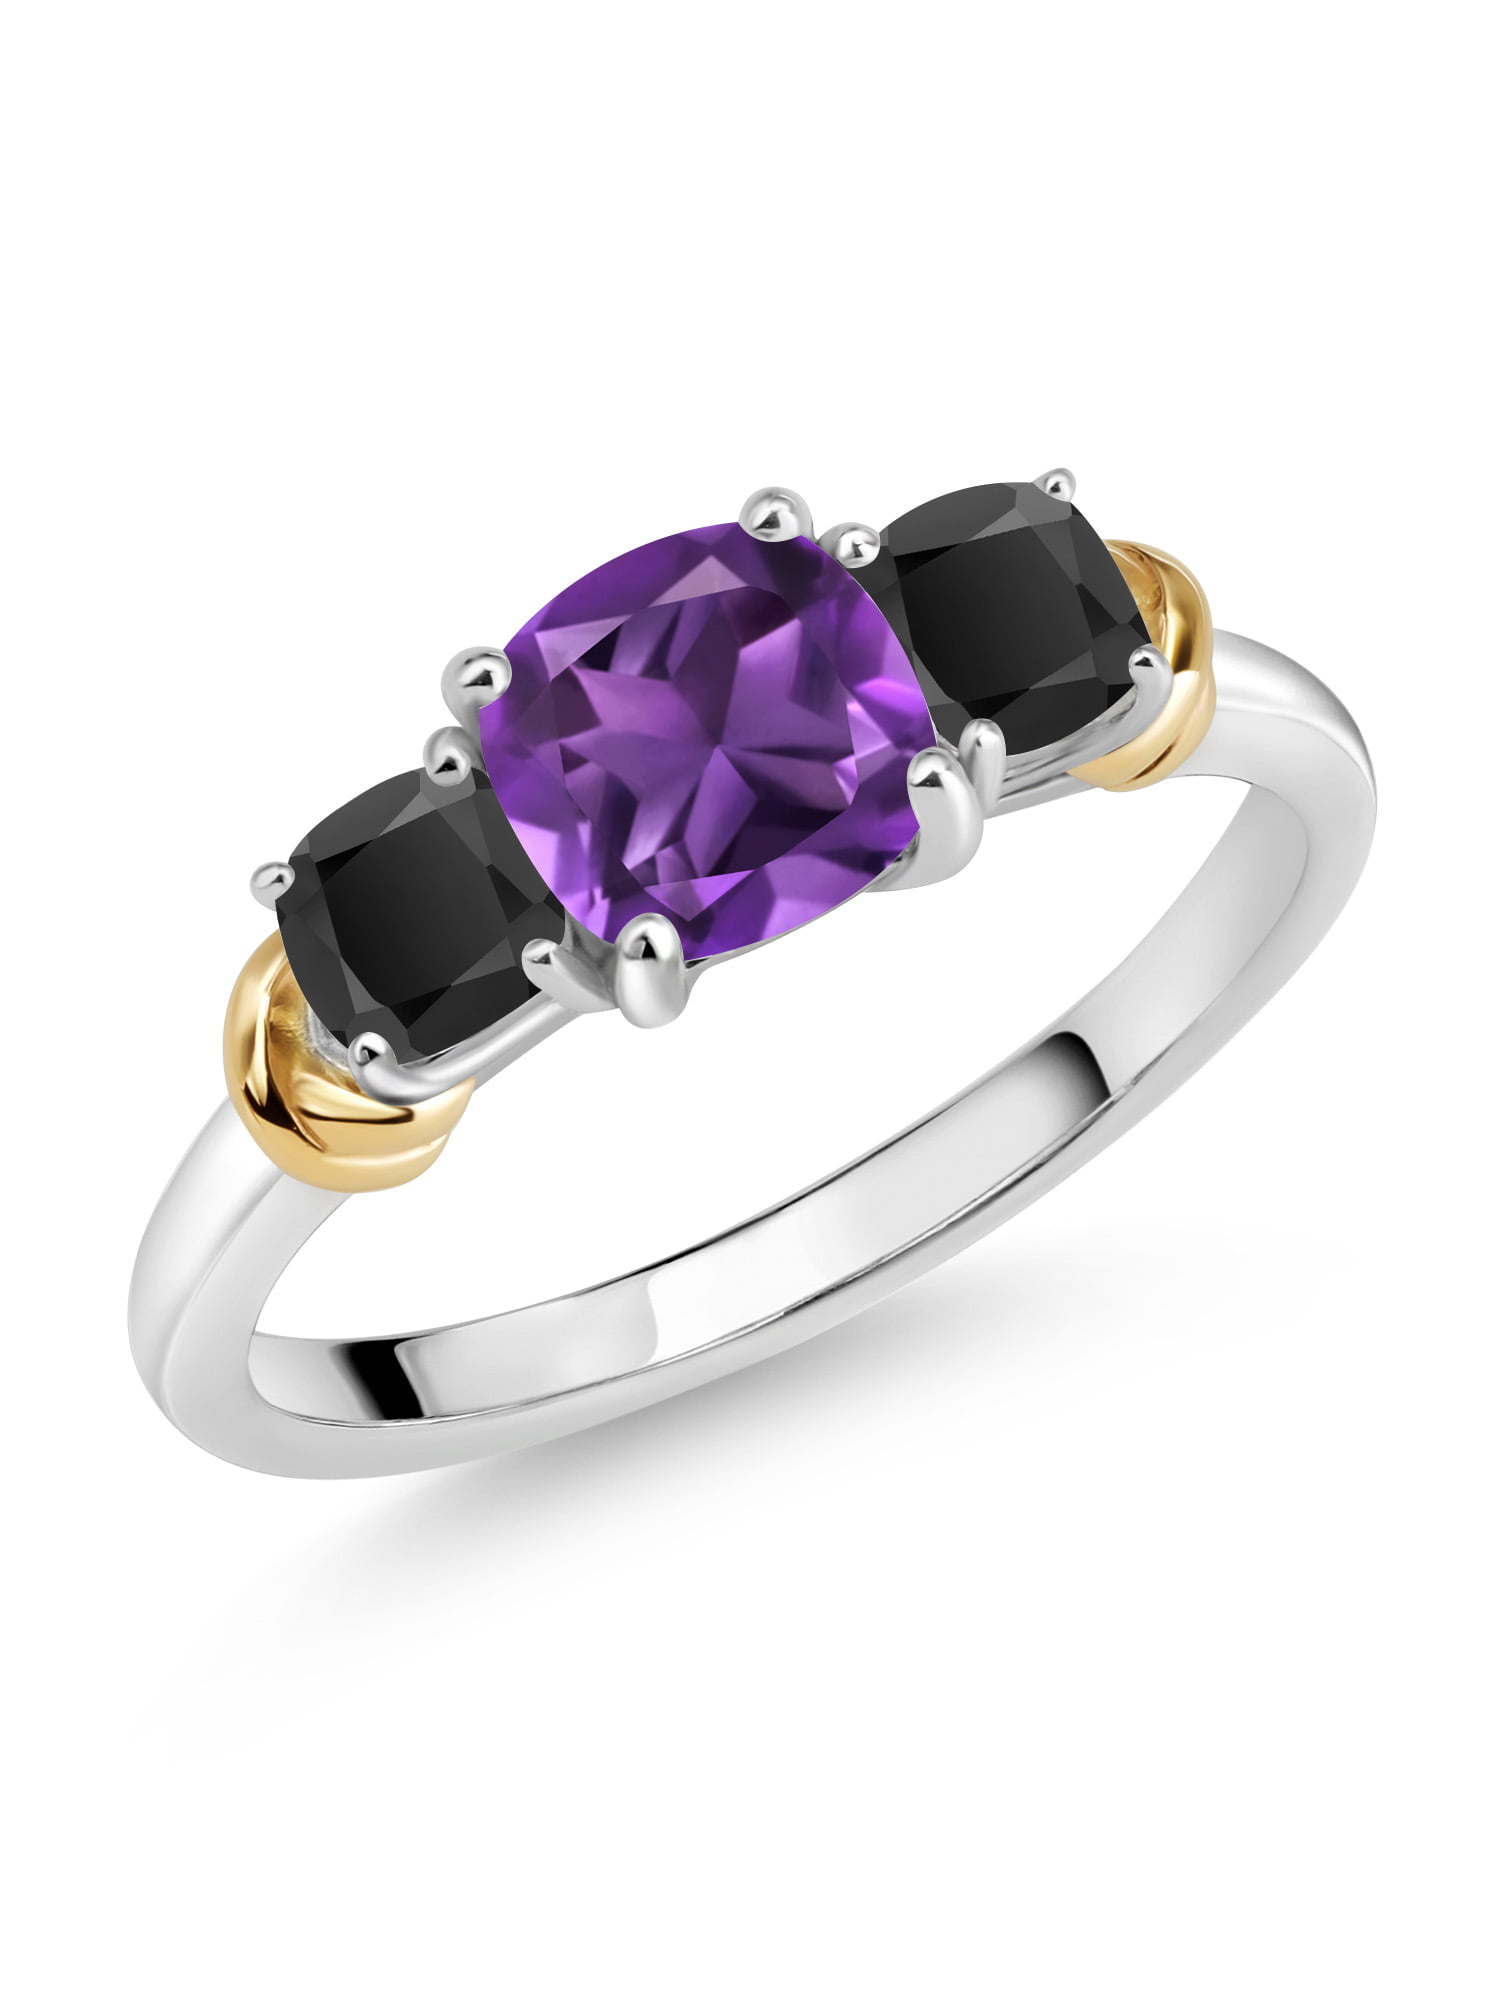 Gem Stone King 925 Sterling Silver and 10K Yellow Gold Purple